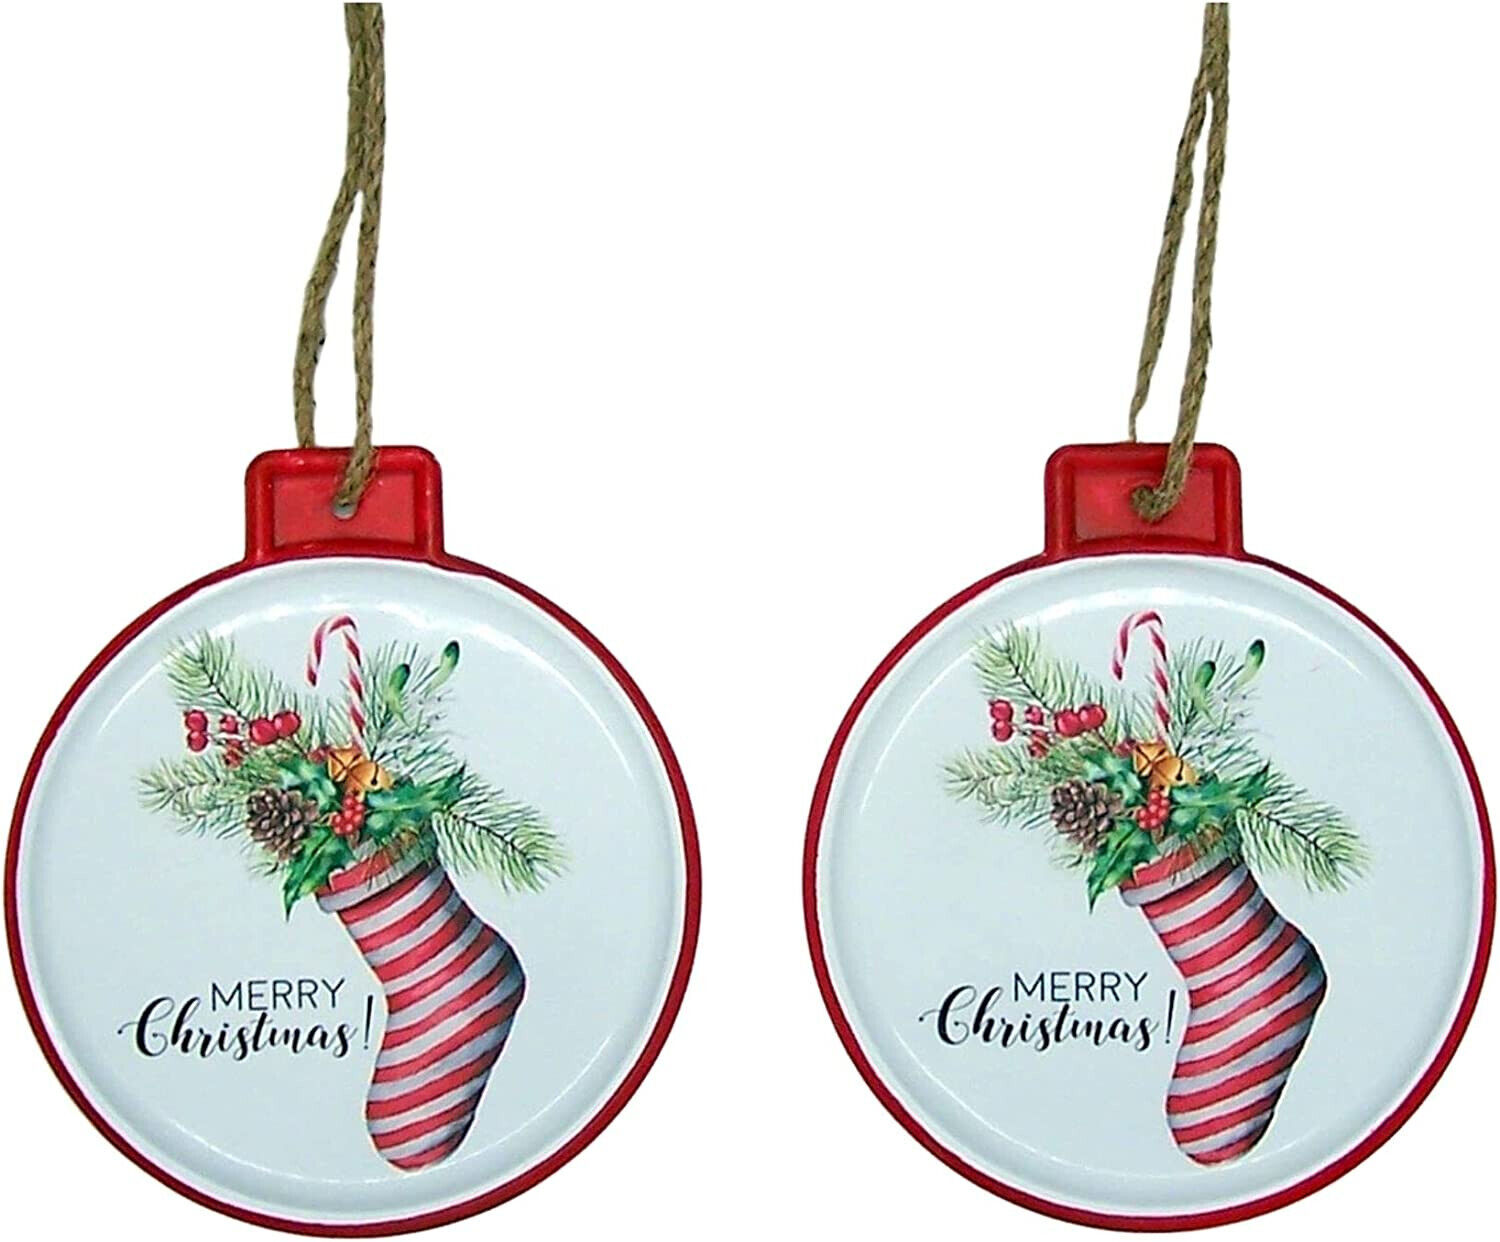 Round Tin Merry Christmas Ornaments with a Stocking, Holiday Decor, Set of 2